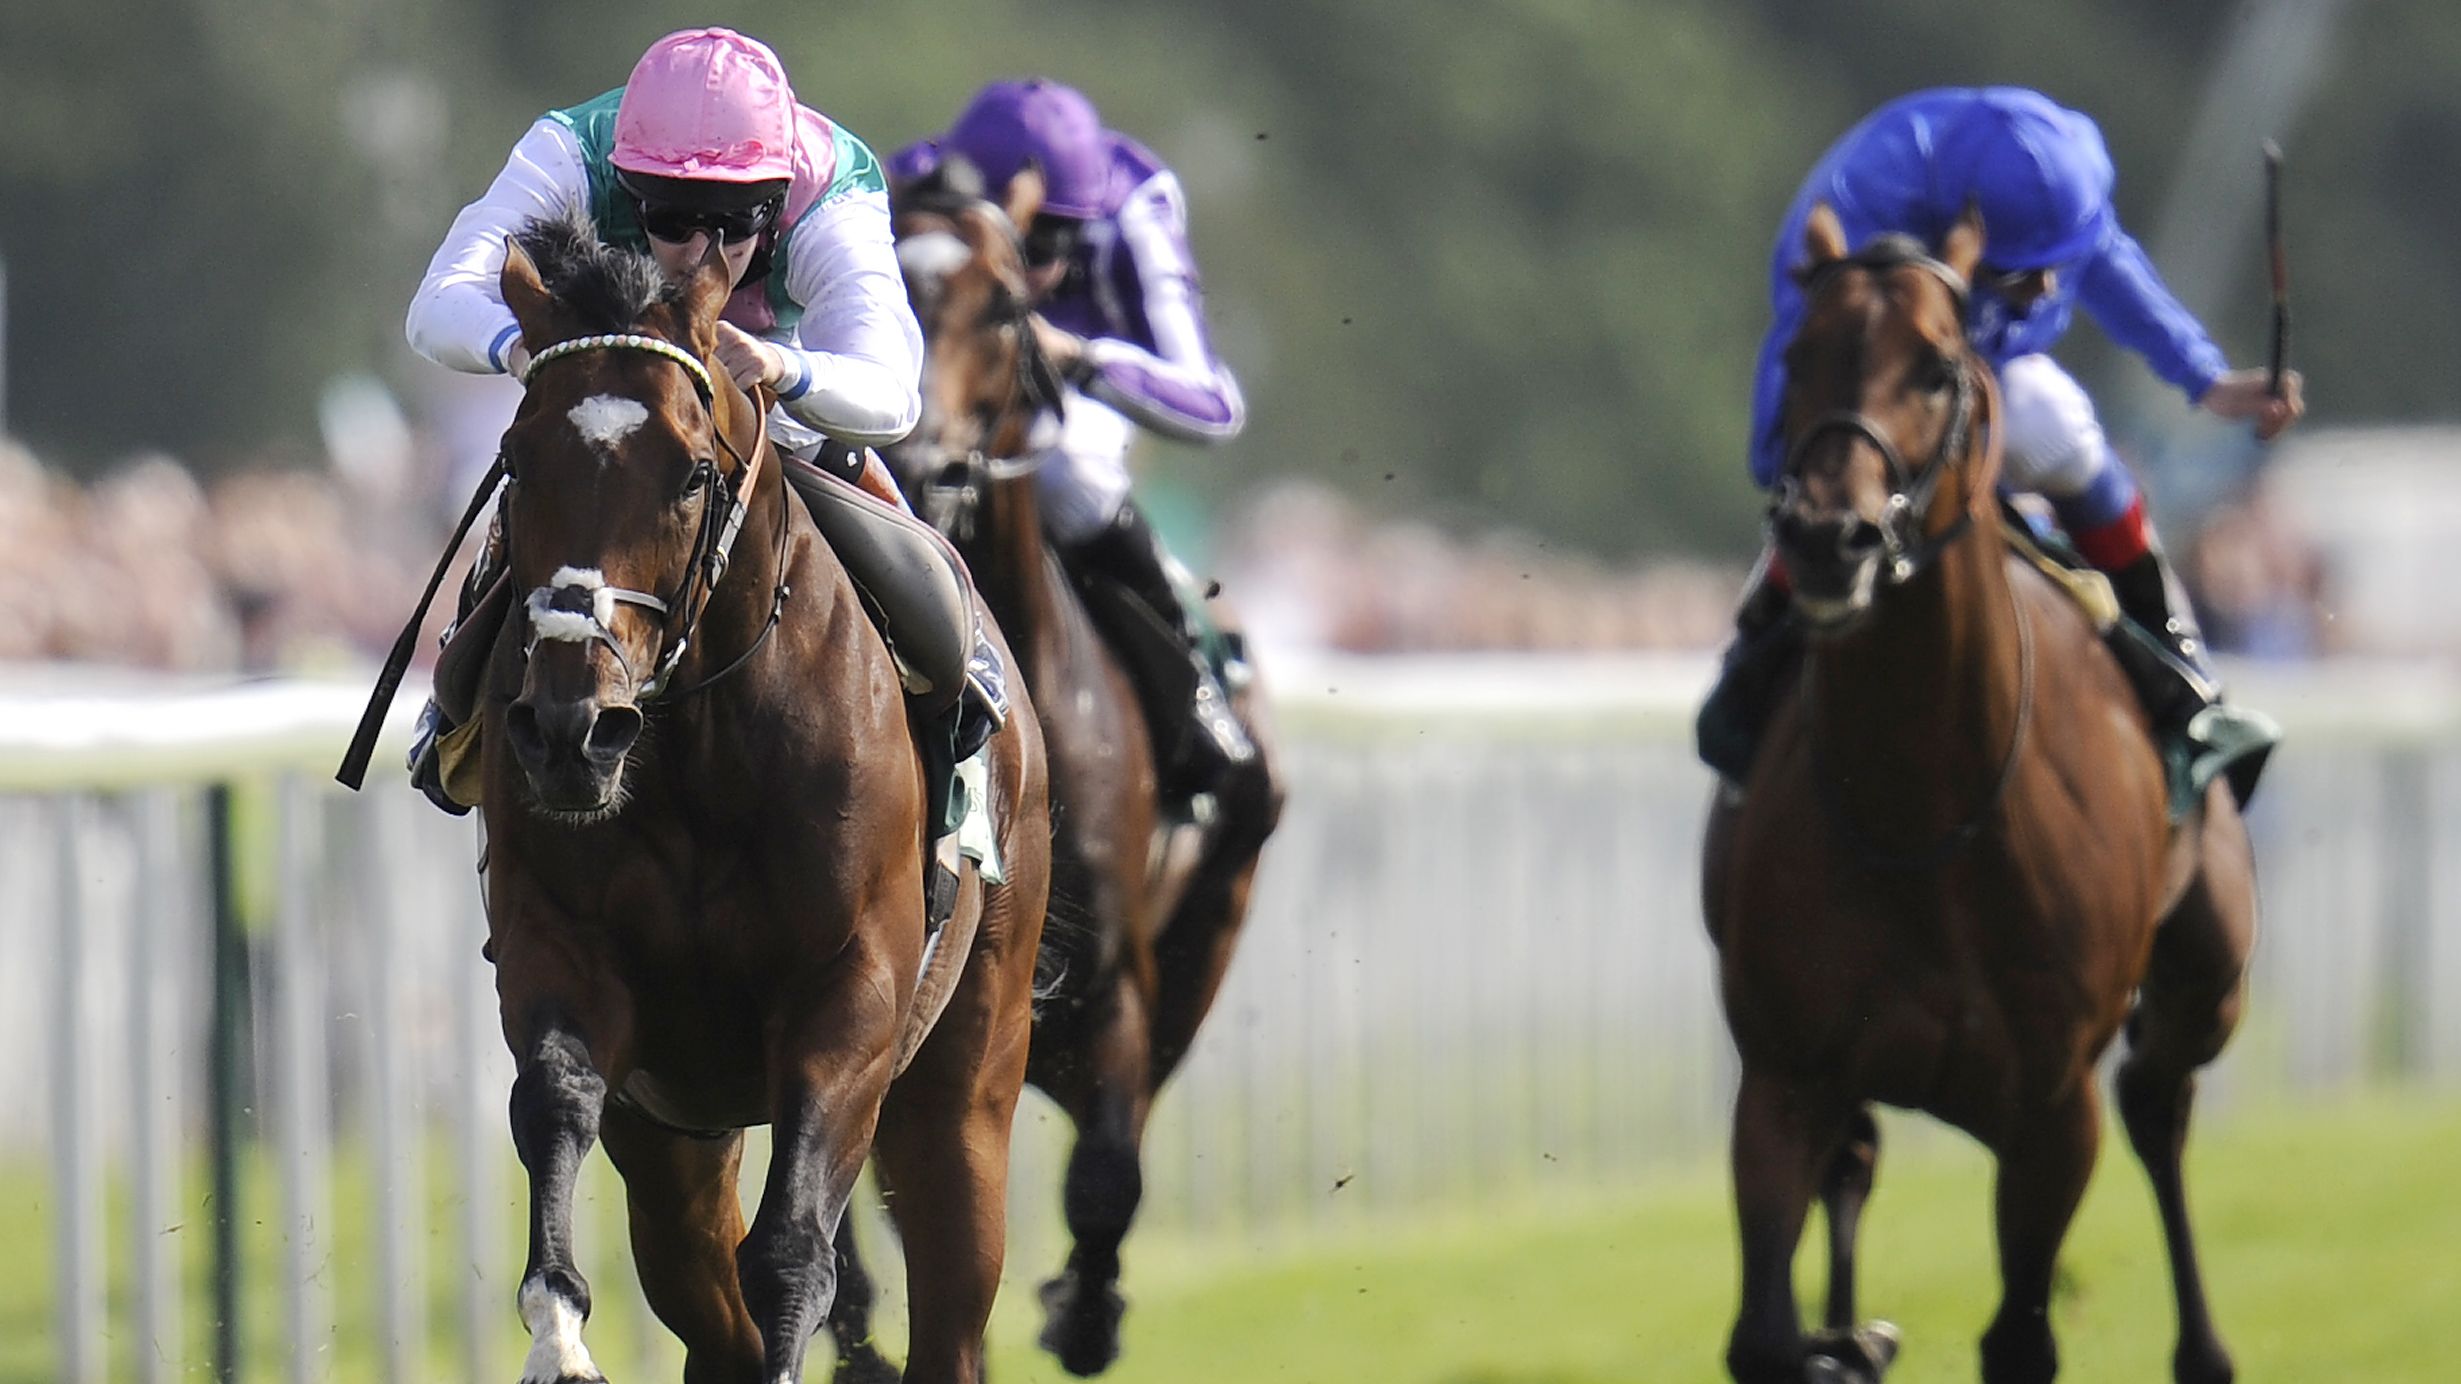 Frankel and jockey Tom Queally burst clear to win the Juddmonte International at York in commanding fashion.